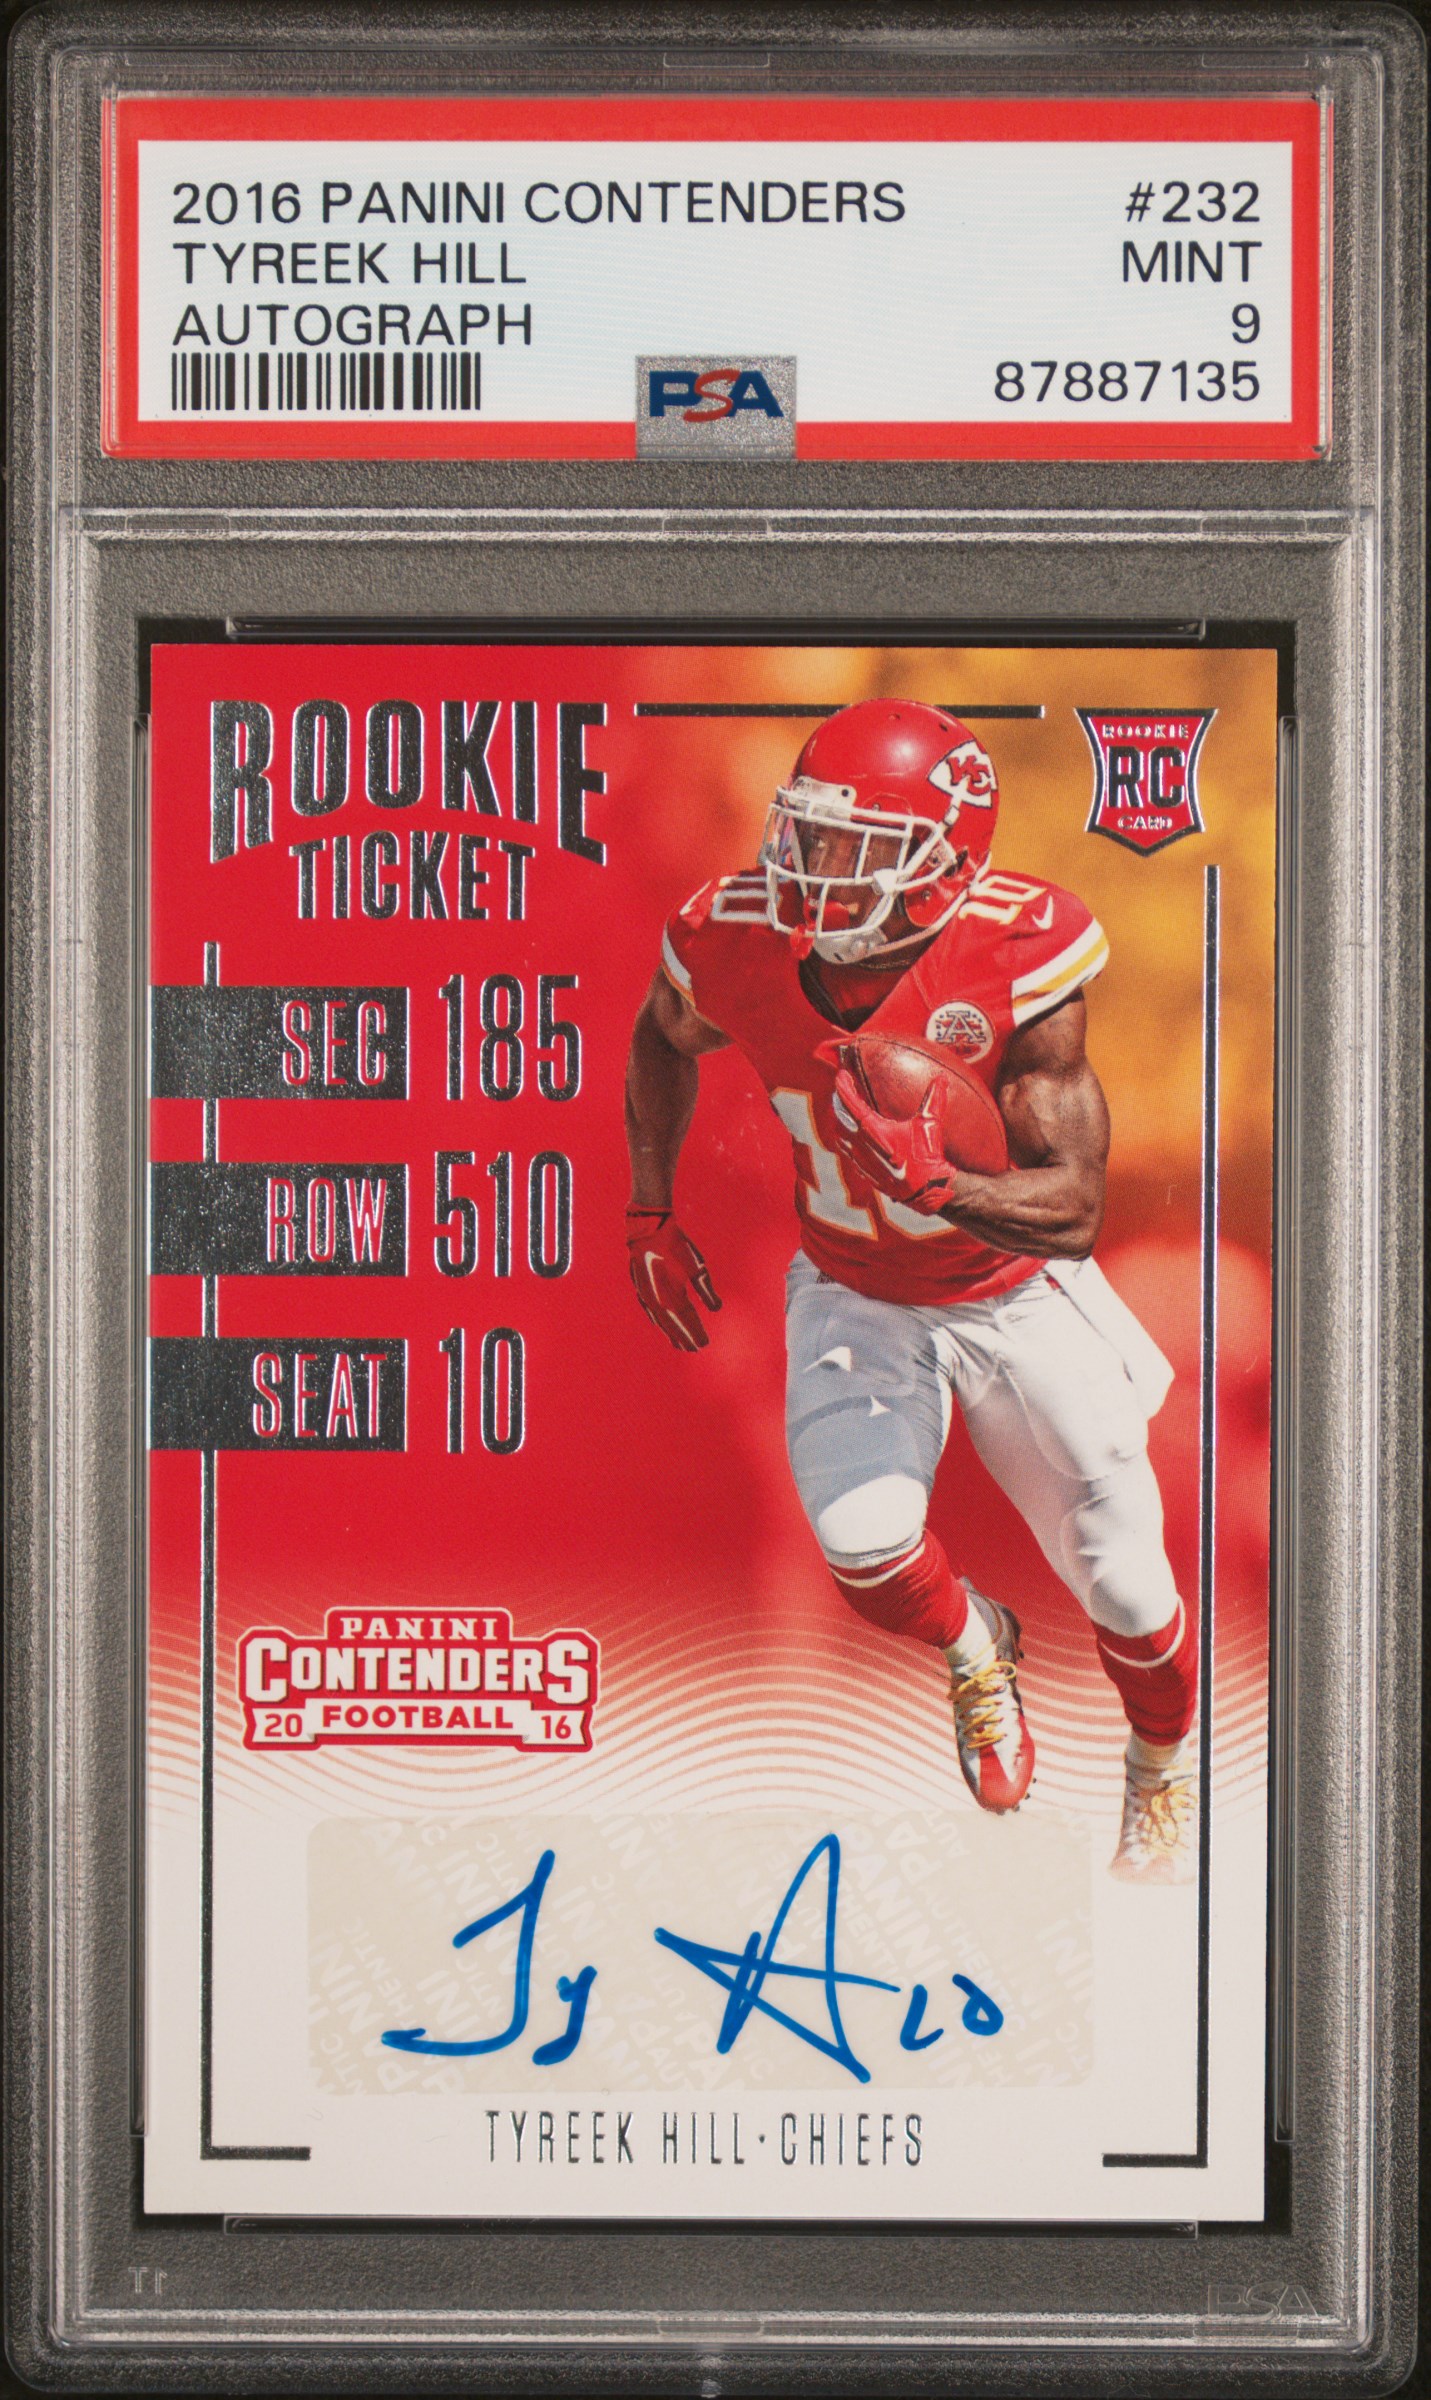 2016 Panini Contenders Autograph 232 Tyreek Hill Signed Rookie Card – PSA MINT 9